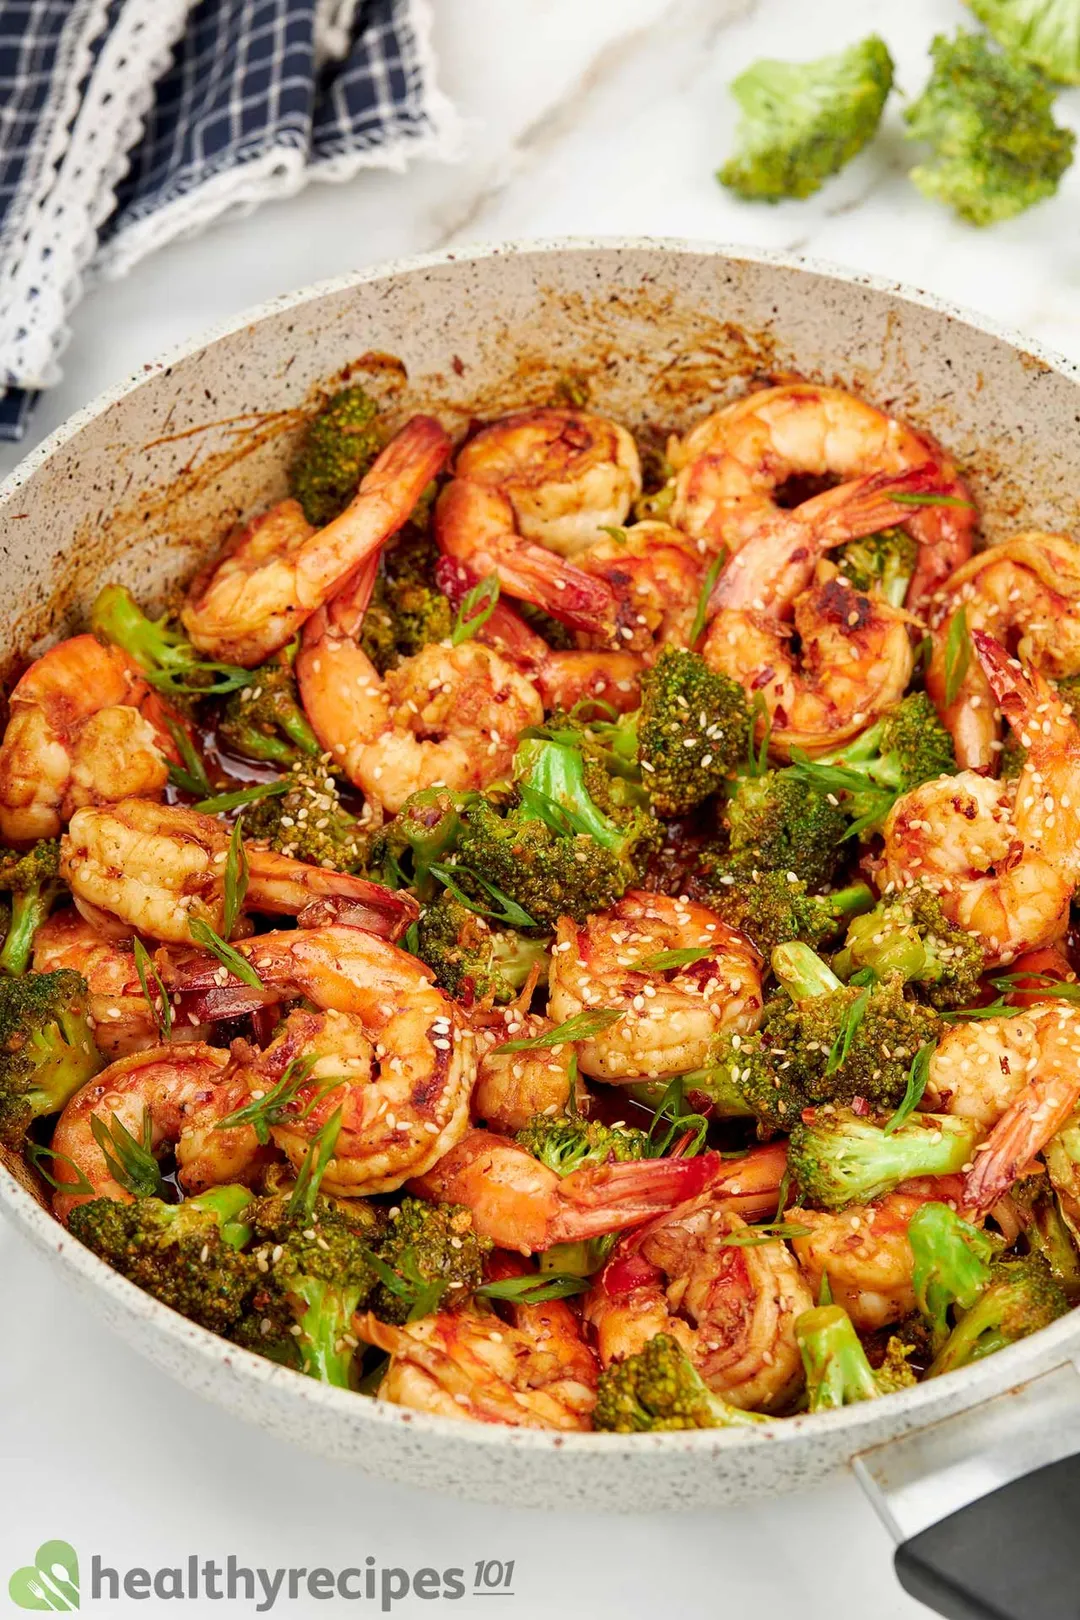 Is Shrimp and Broccoli Healthy